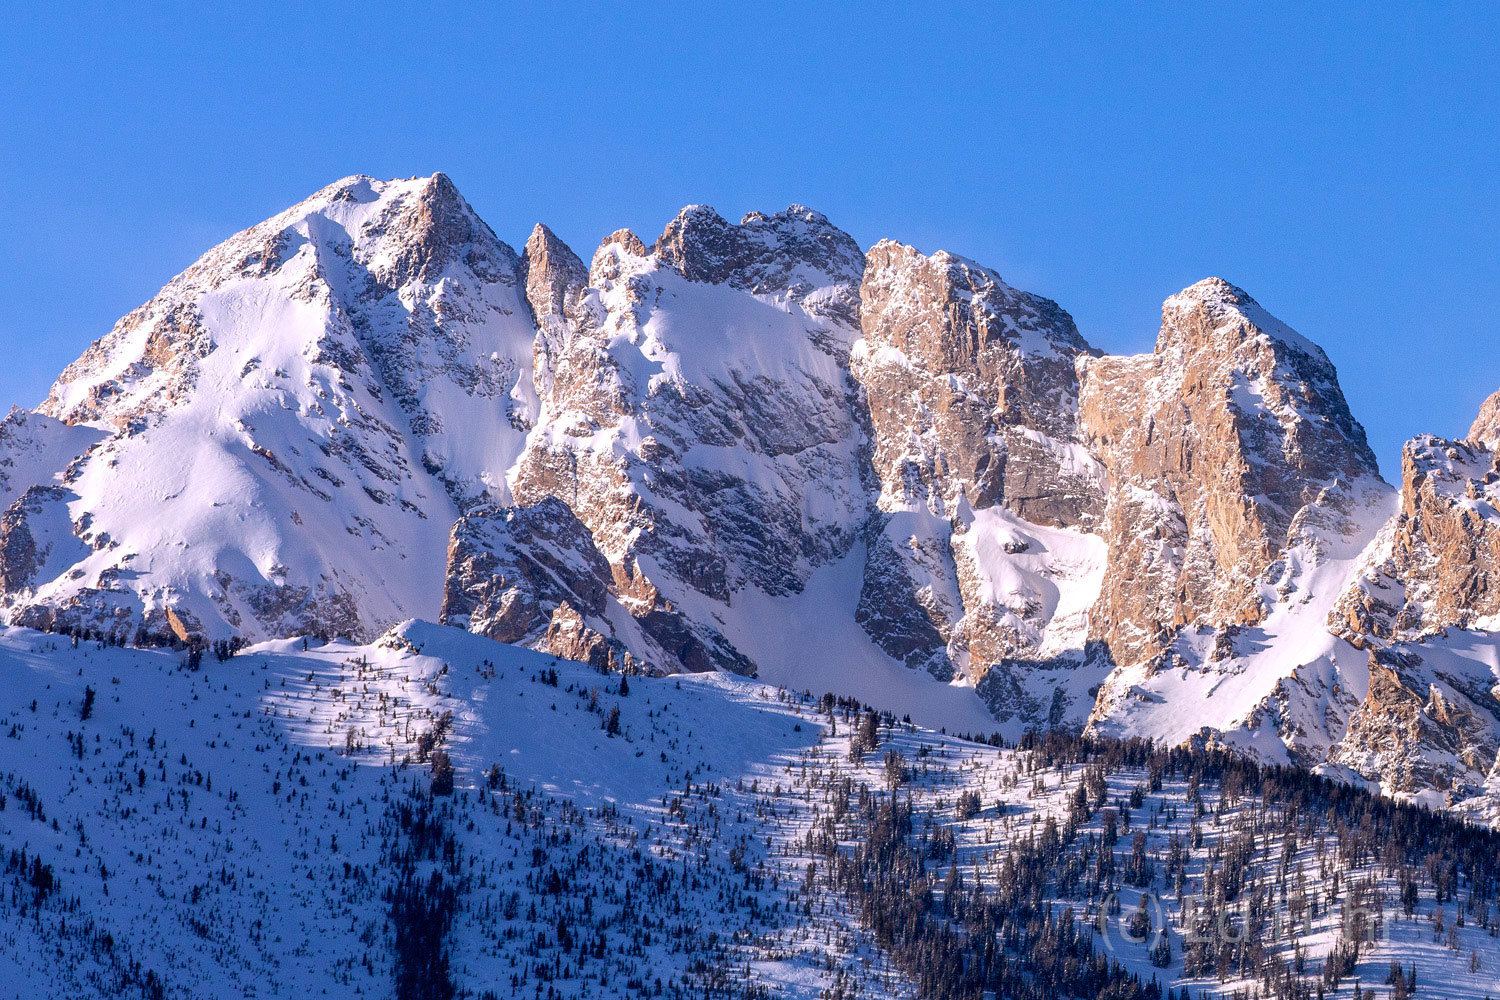 The spires of the Grand Tetons are glorious and foreboding in winter when storms can appear with little notice.